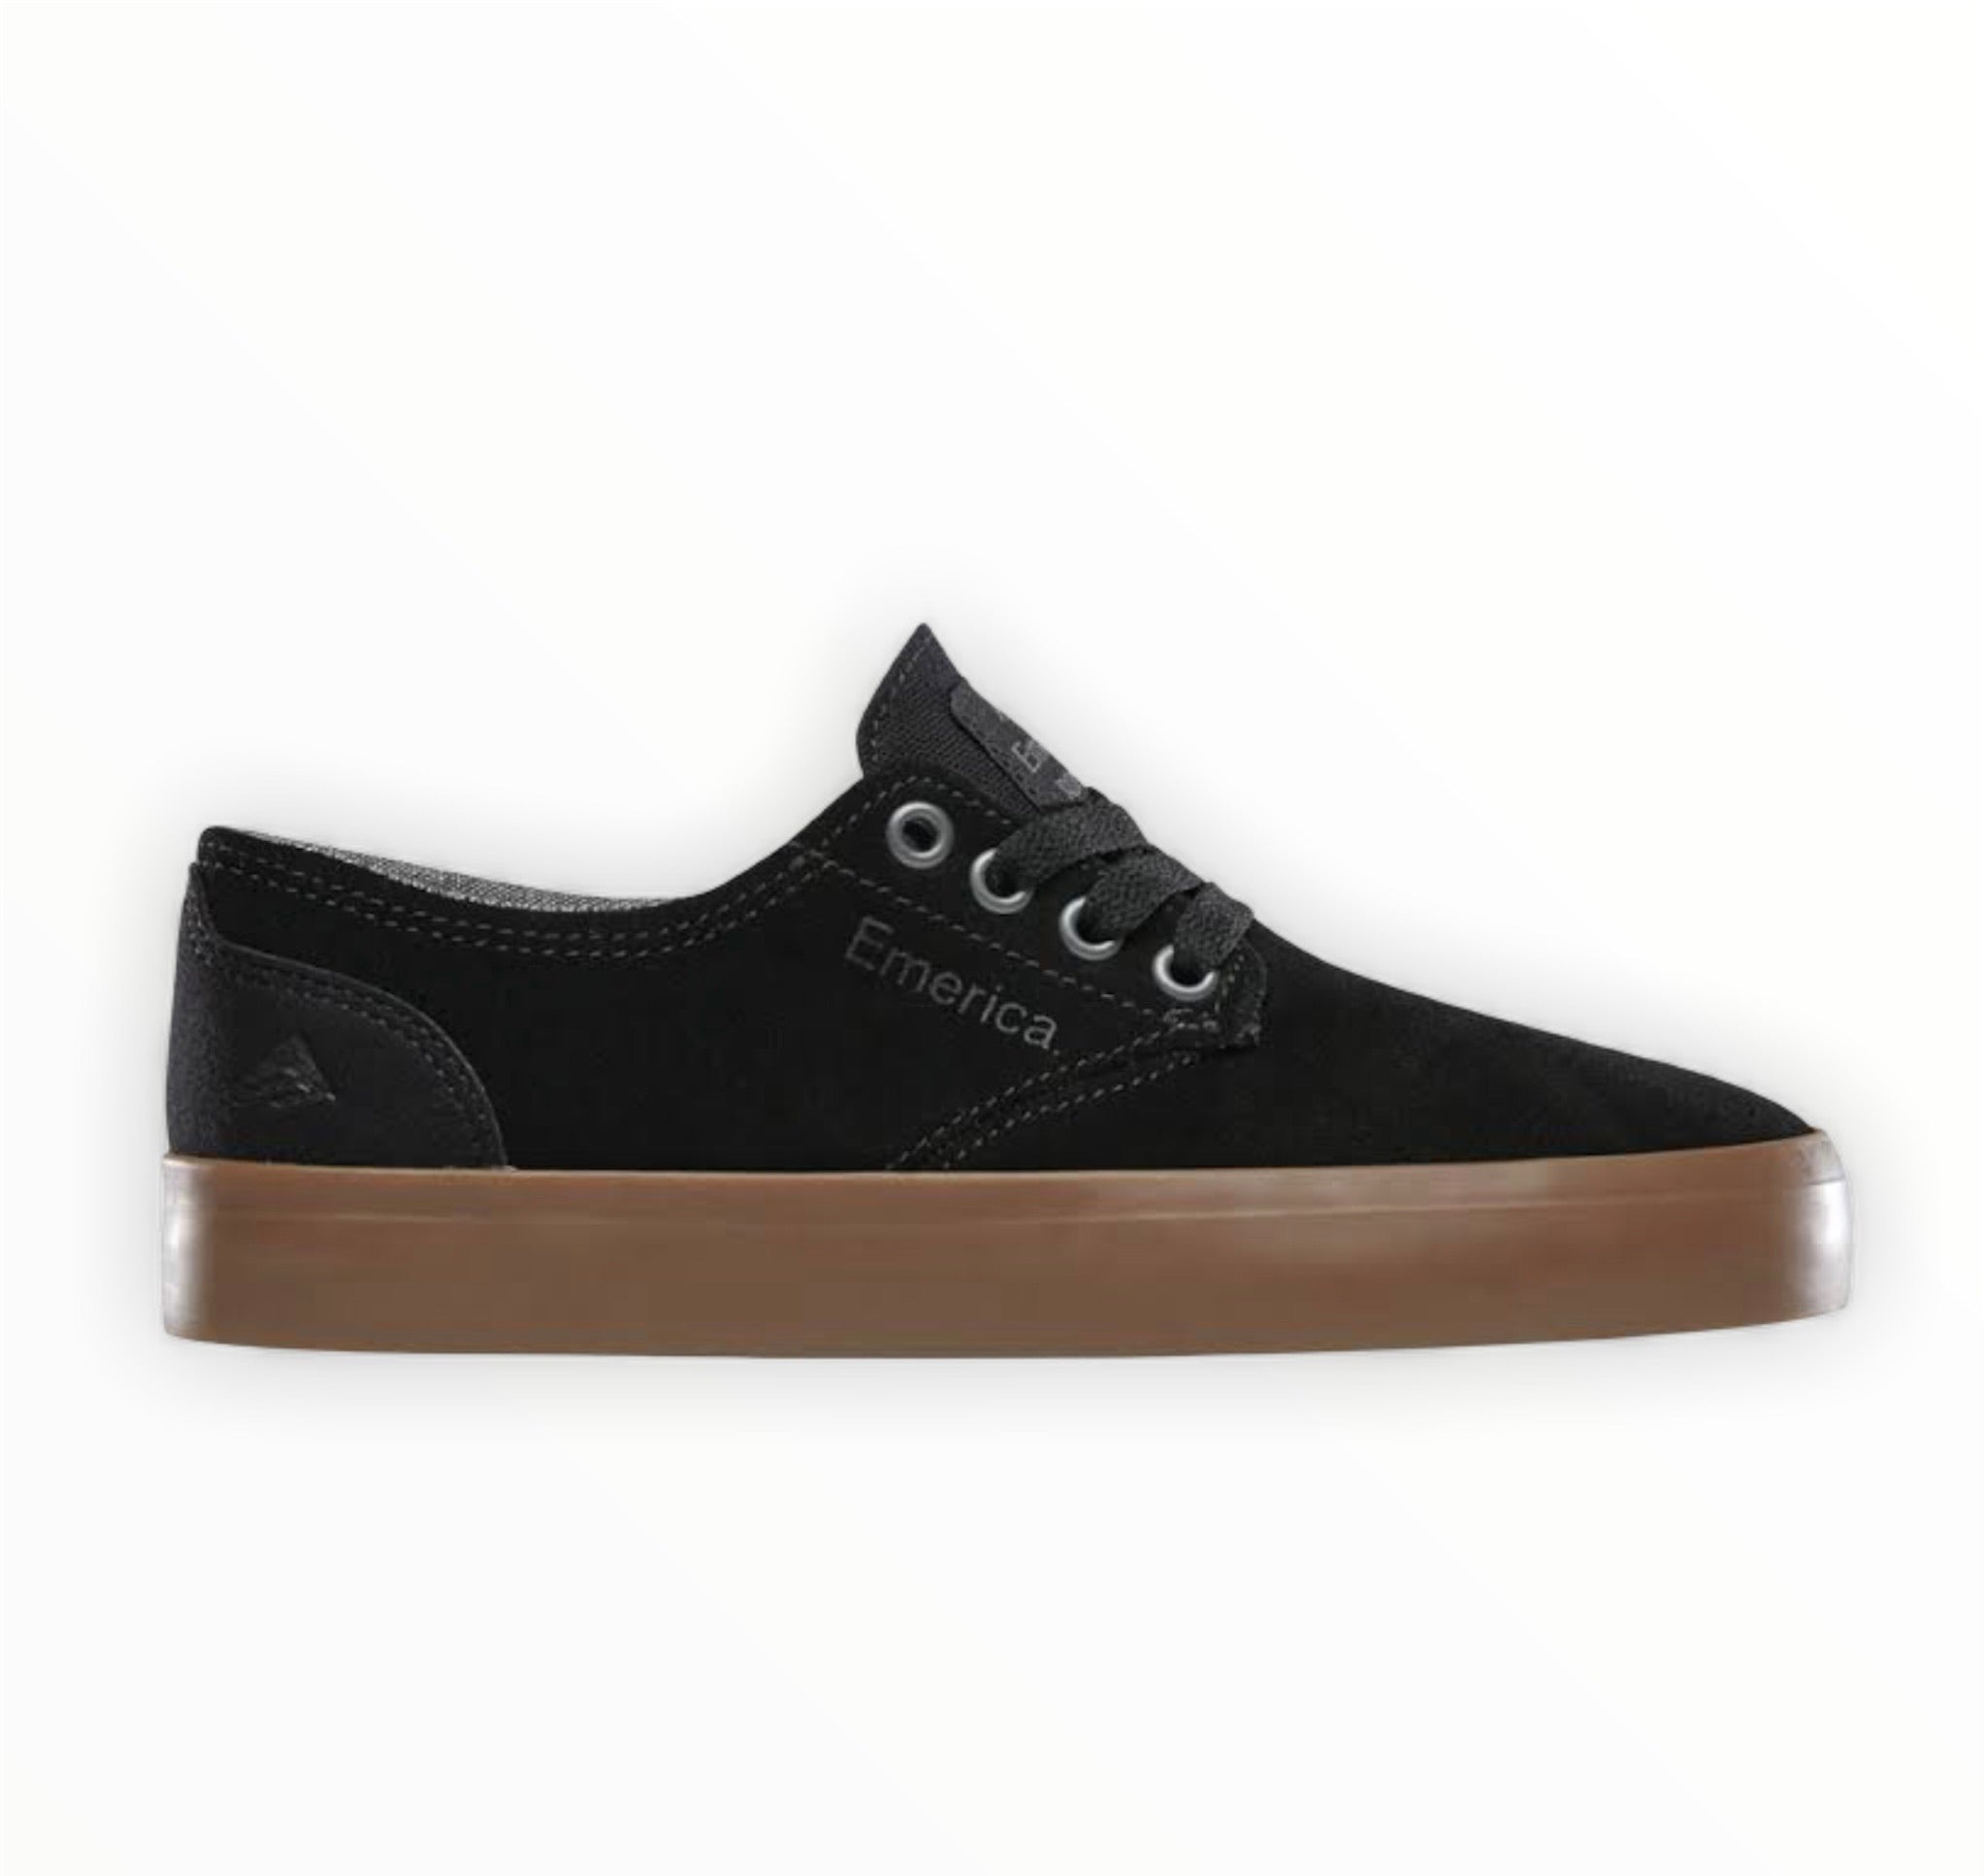 The Romero Laced YOUTH Black/Gum